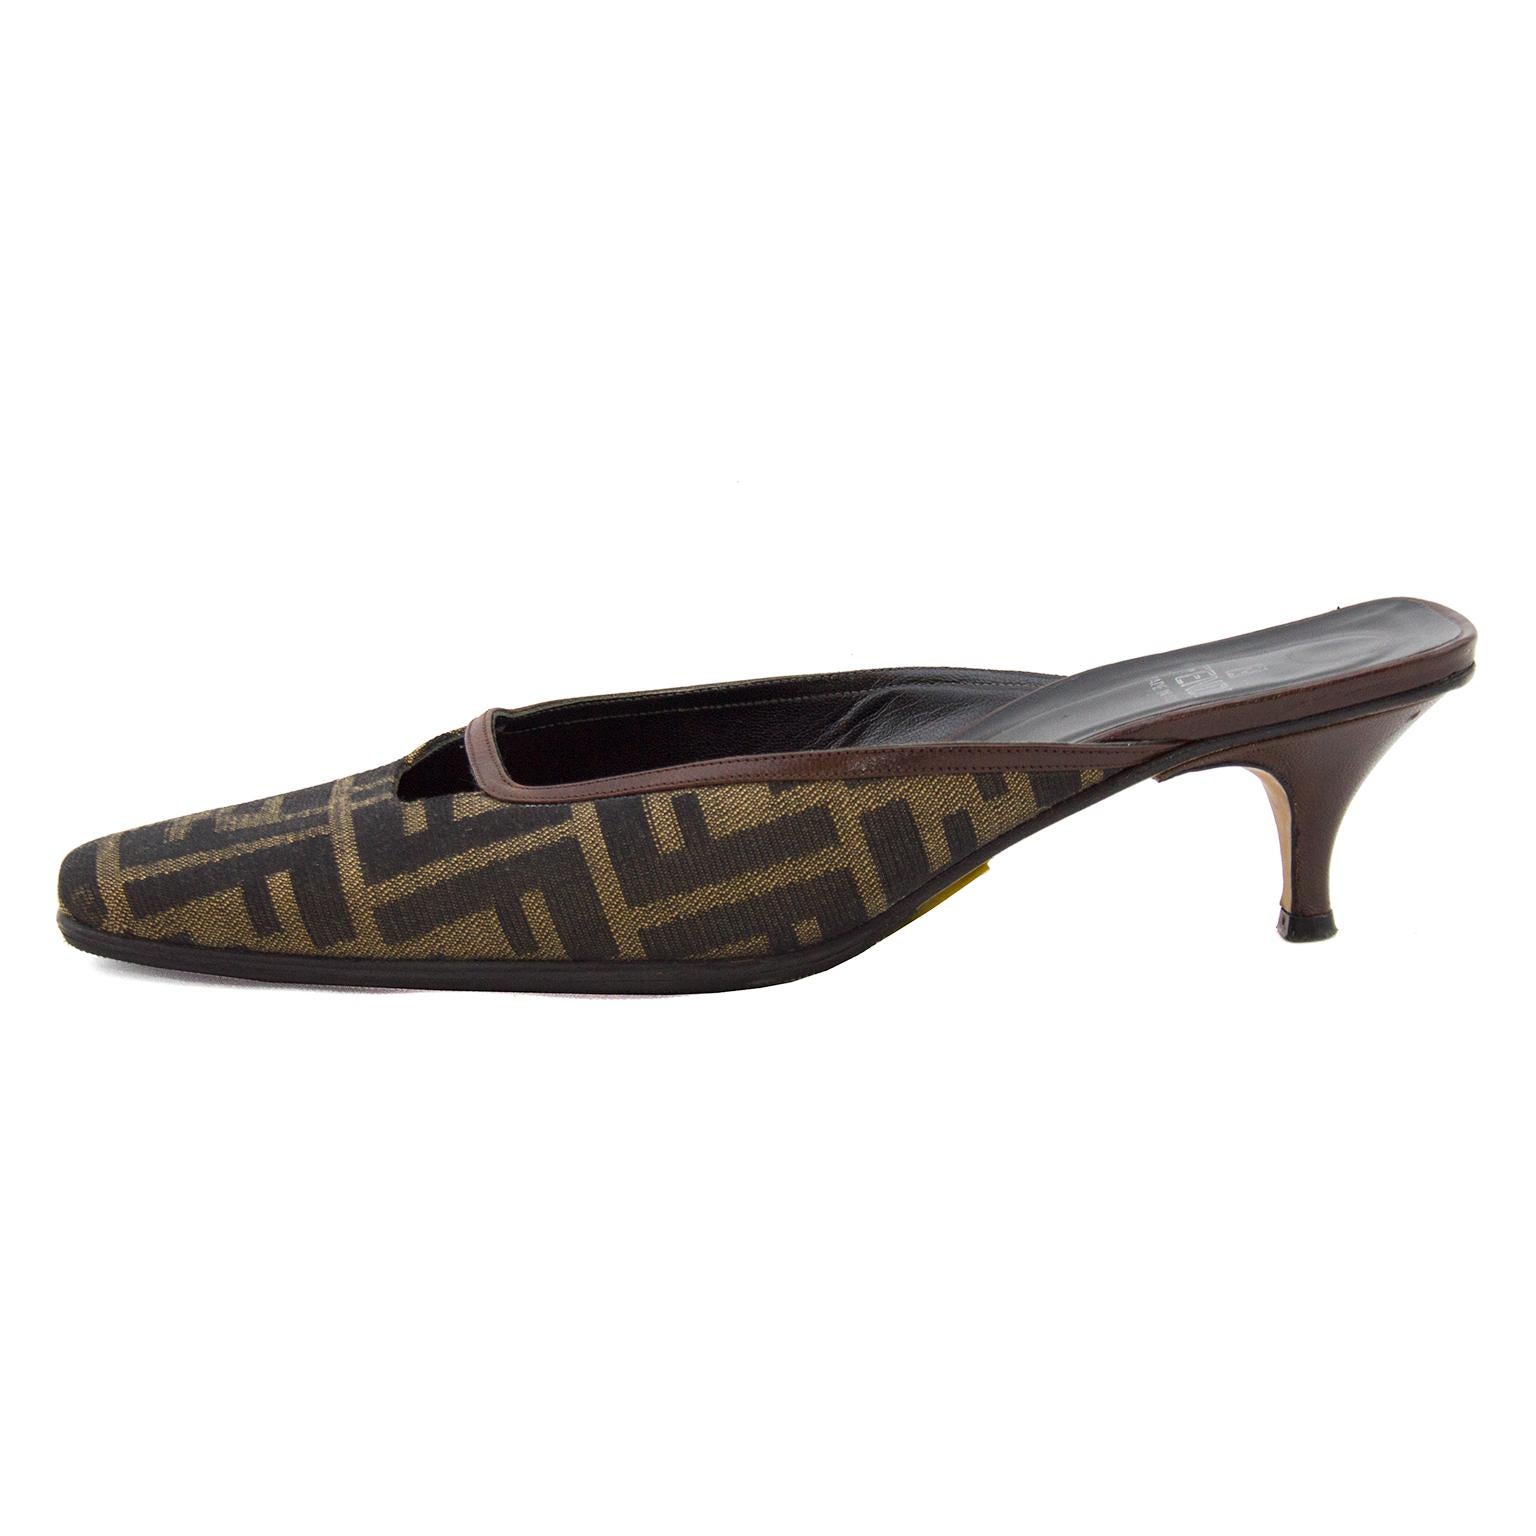 Fendi Zuca pattern square to slides in size 7.5 US. In excellent condition. Trimmed in chestnut brown leather with peek-a-boo opening to add some charm to the already chic mules. Low kitten style heel, perfect with your favorite denim or black